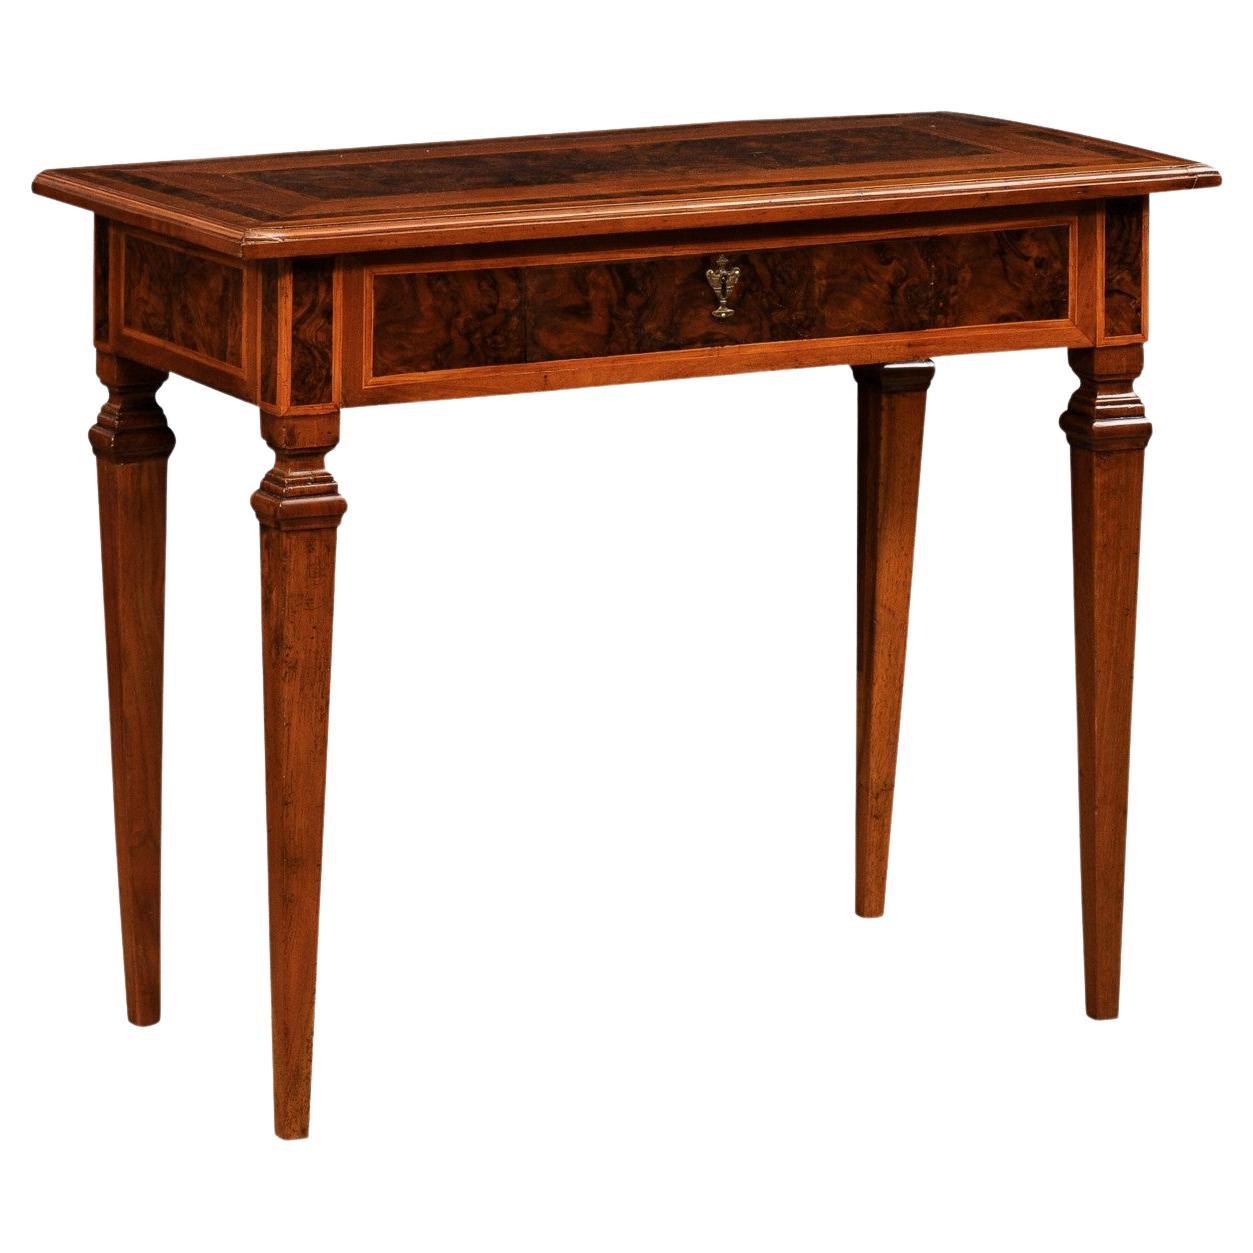 Italian Neoclassical Period 18th Century Console Table with Marquetry Décor For Sale